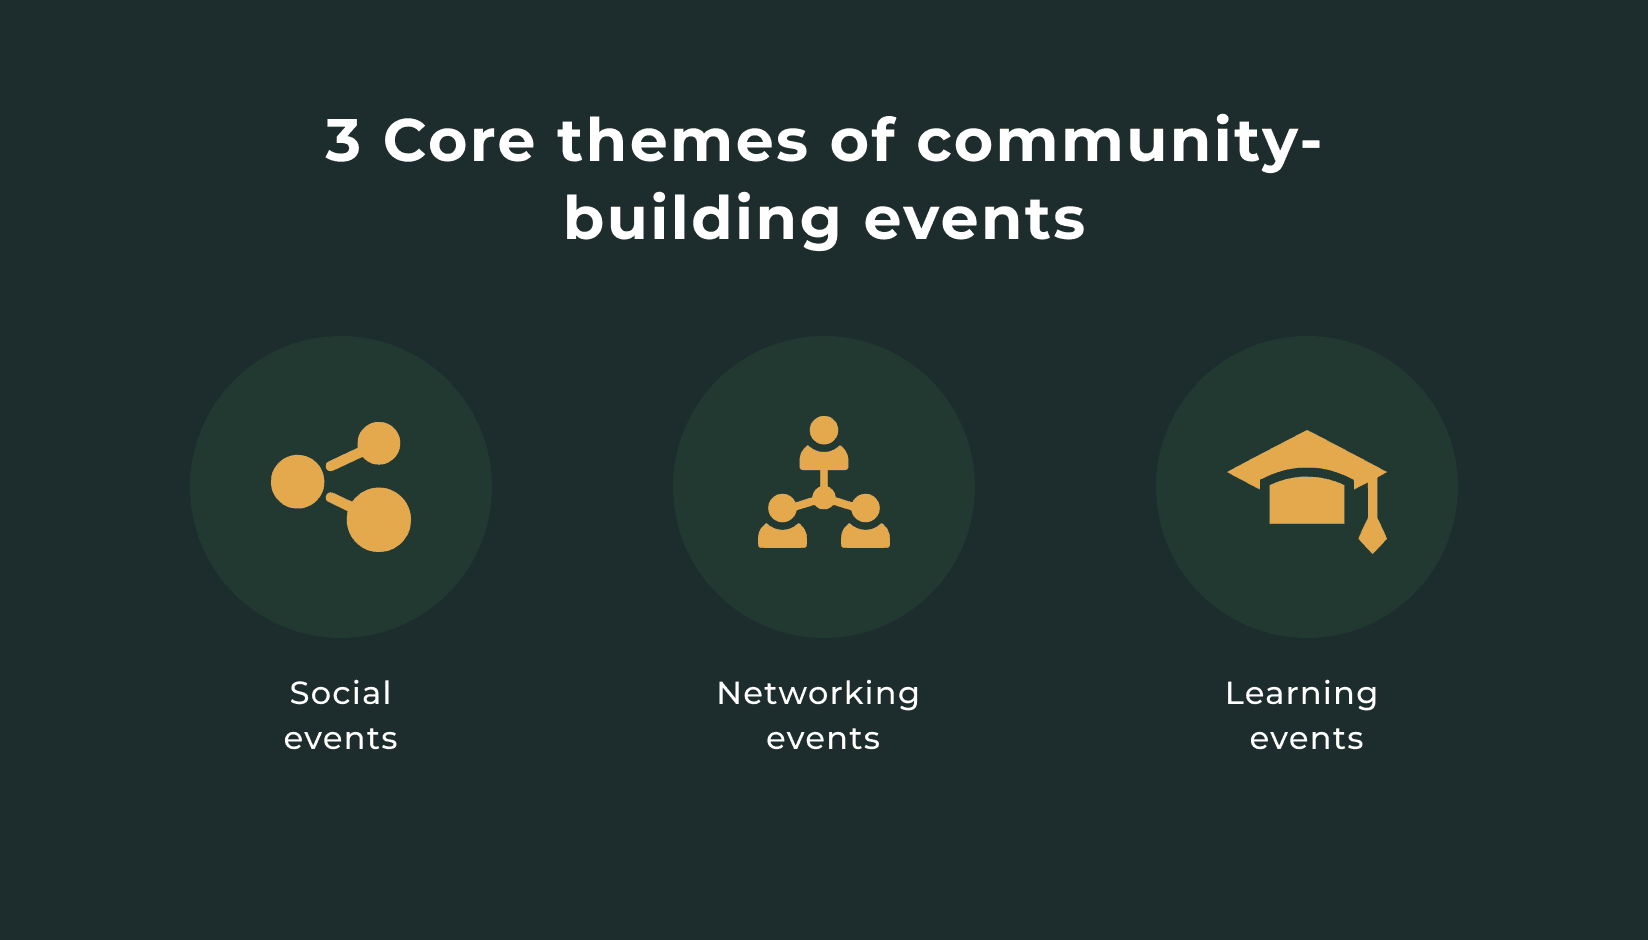 3 core themes of community-building events - infographic